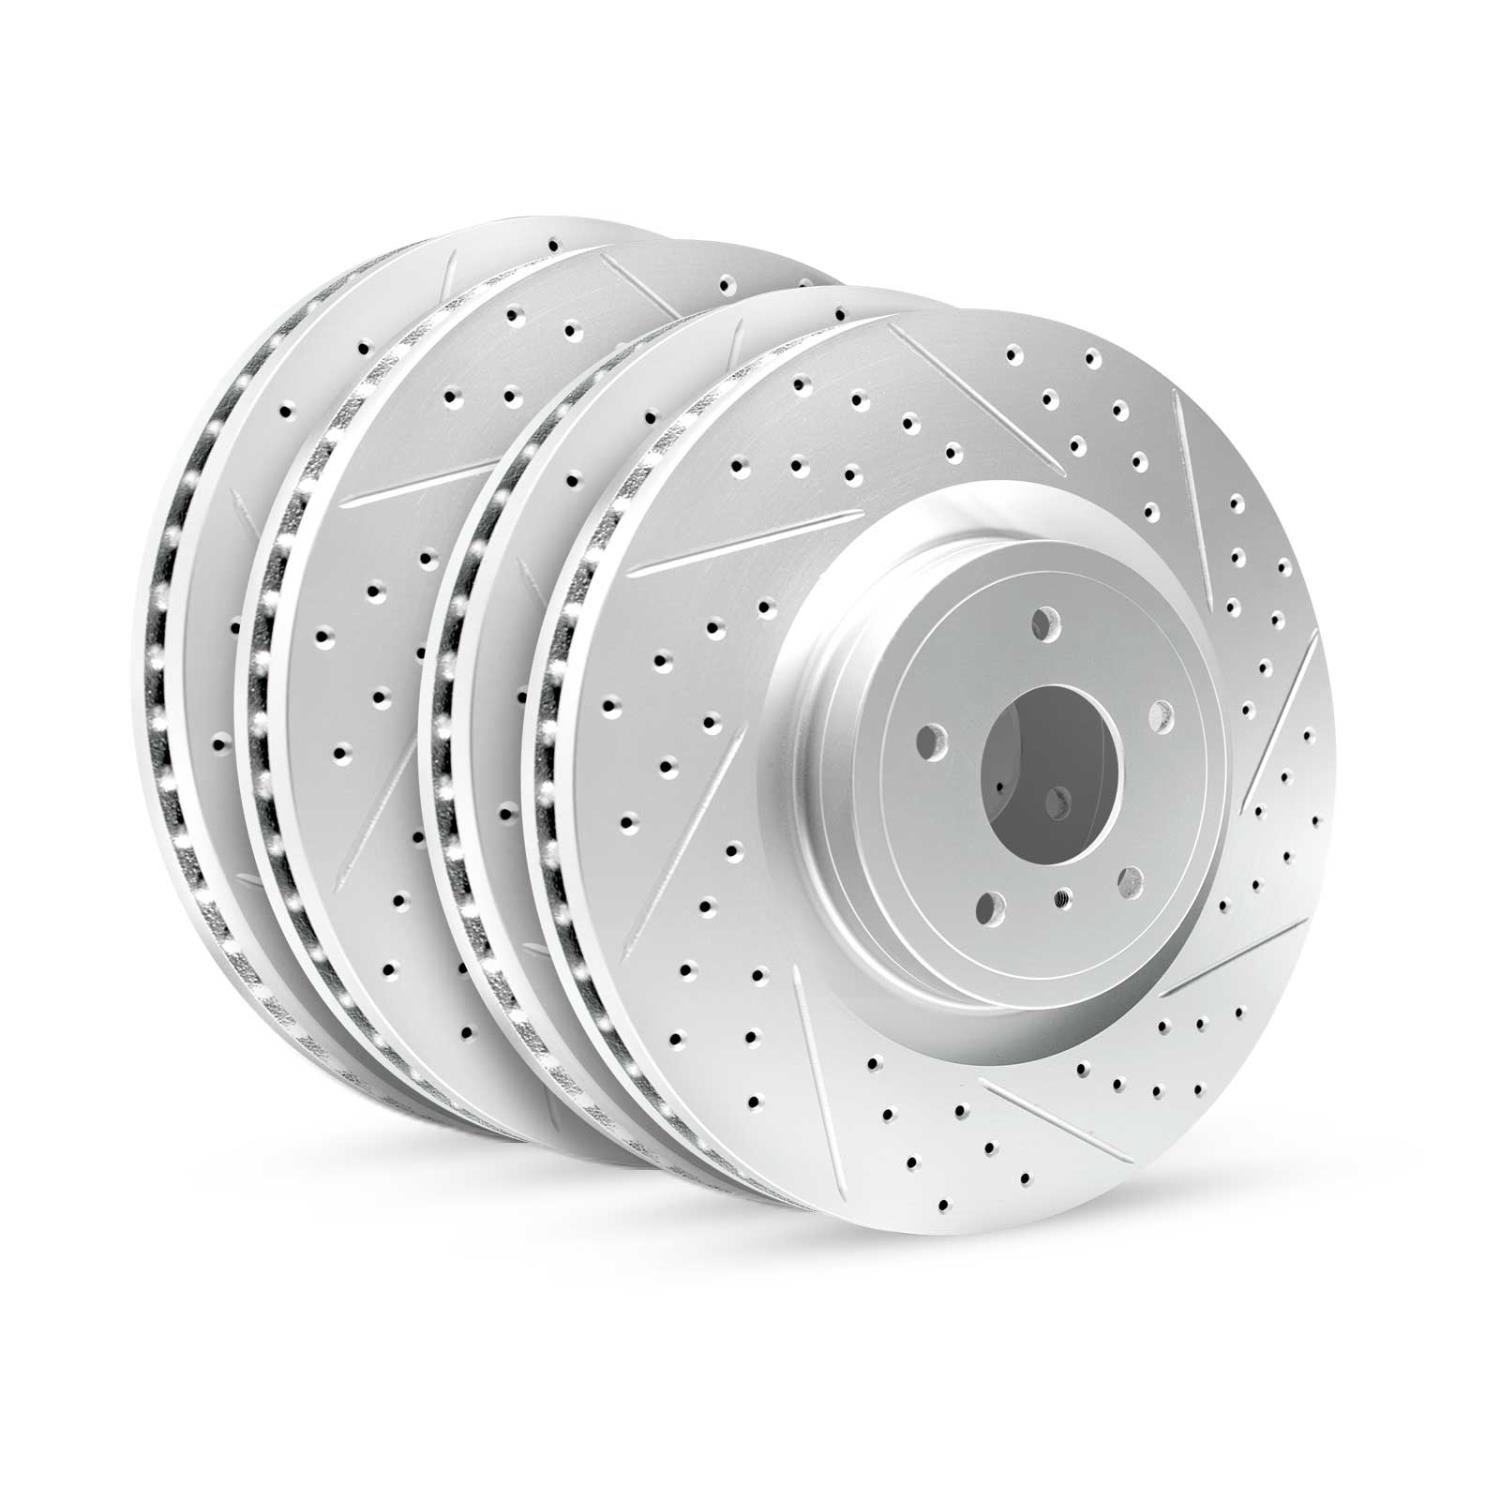 GEO-Carbon Drilled/Slotted Rotors, 2009-2011 Kia/Hyundai/Genesis, Position: Front/Rear